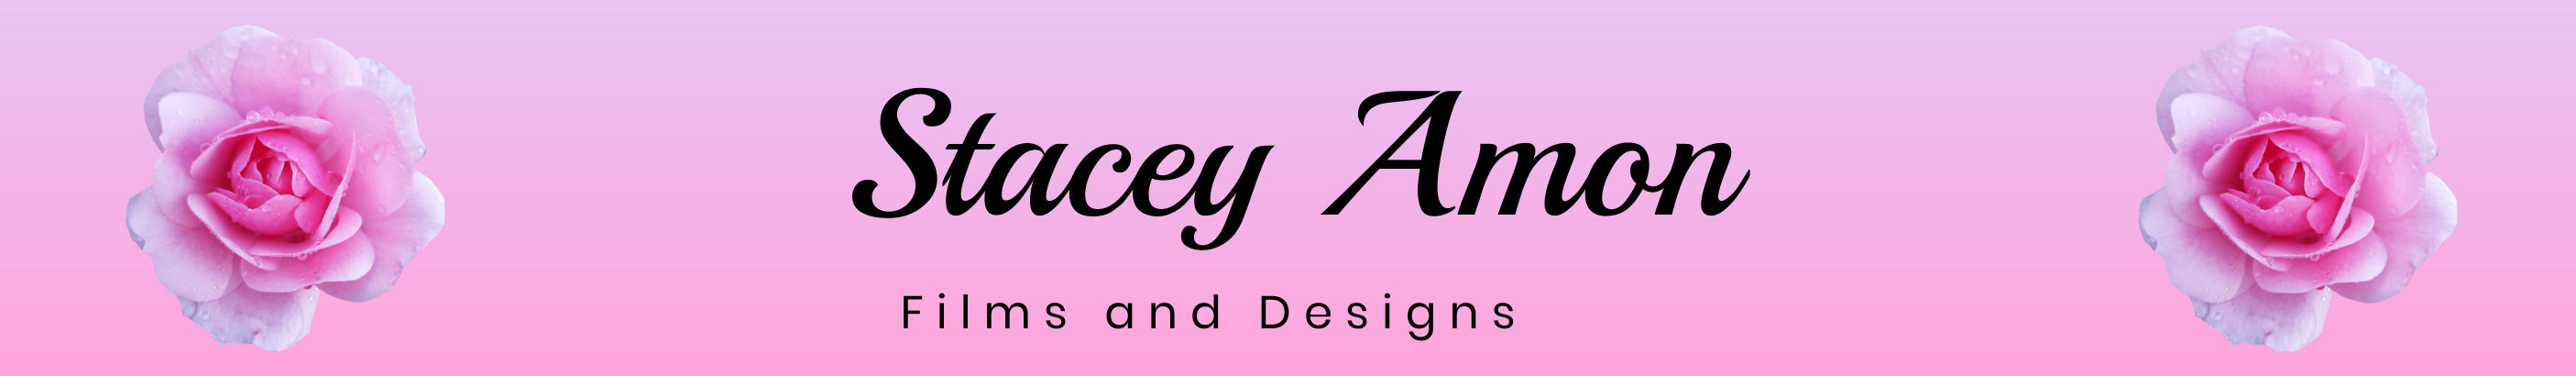 Stacey Amon's profile banner